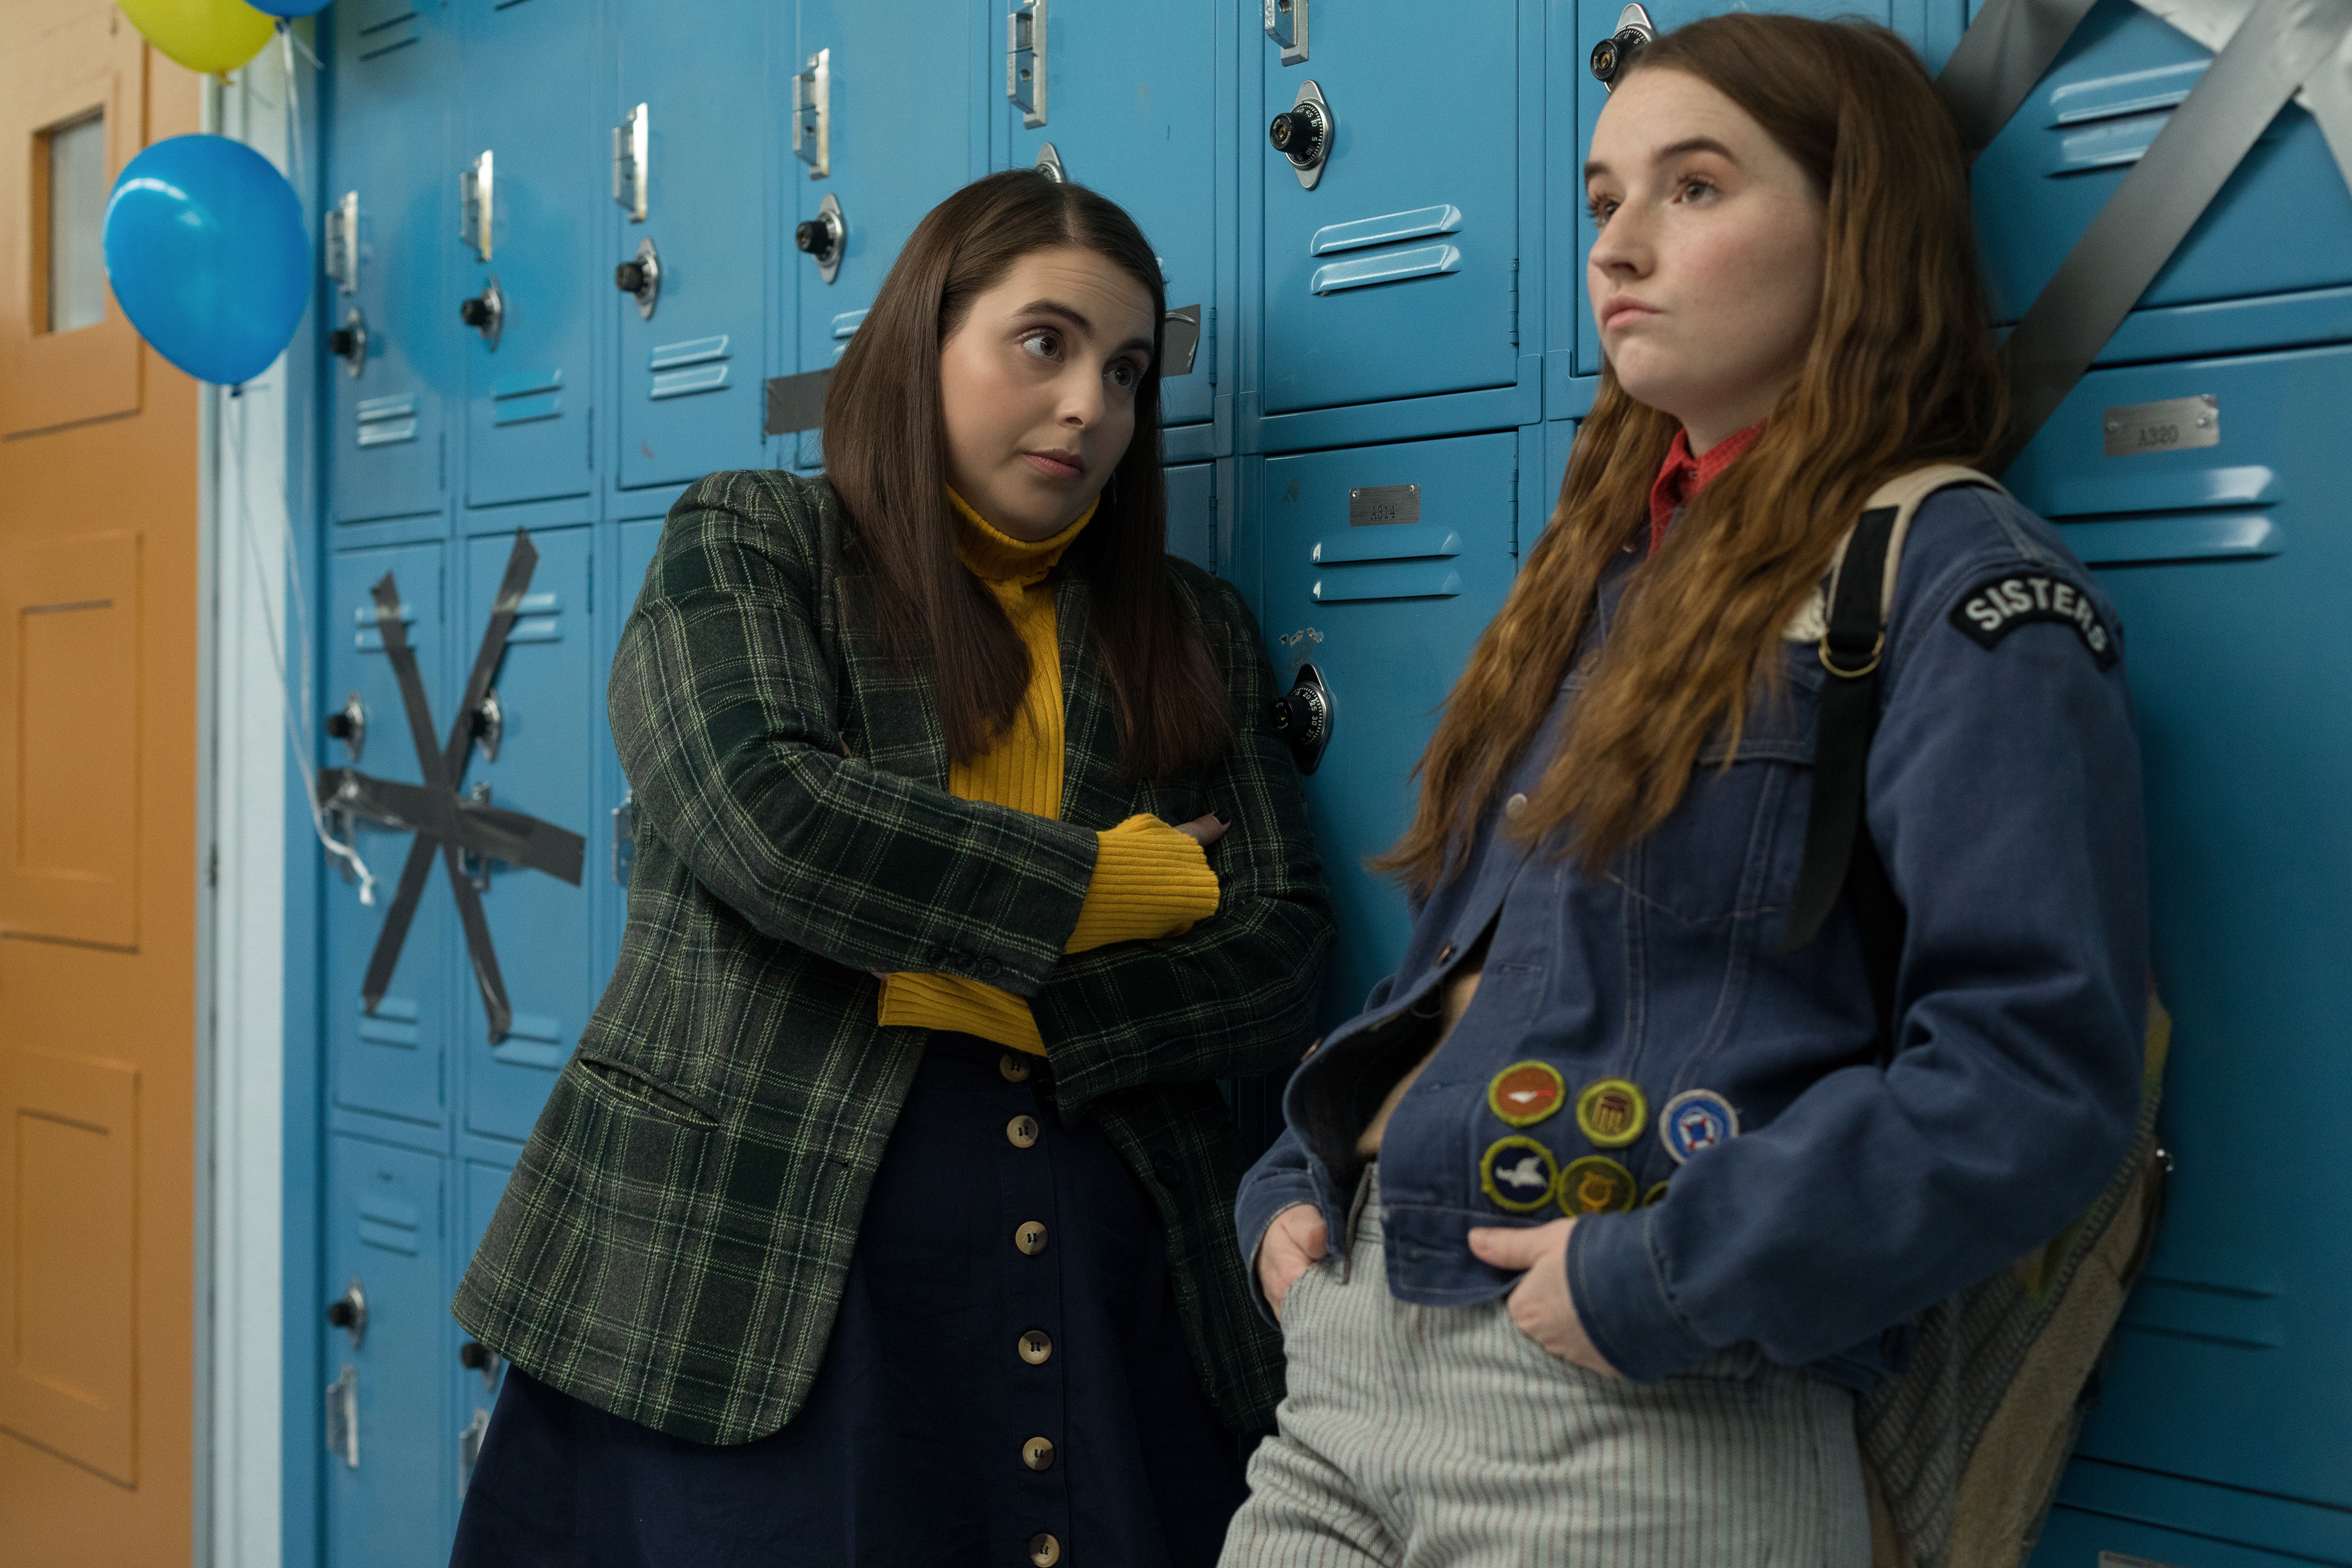 Movie Review: Nerds Realize That Good Grades and Partying Aren't Mutually  Exclusive in the Goofy and Sweet 'Booksmart